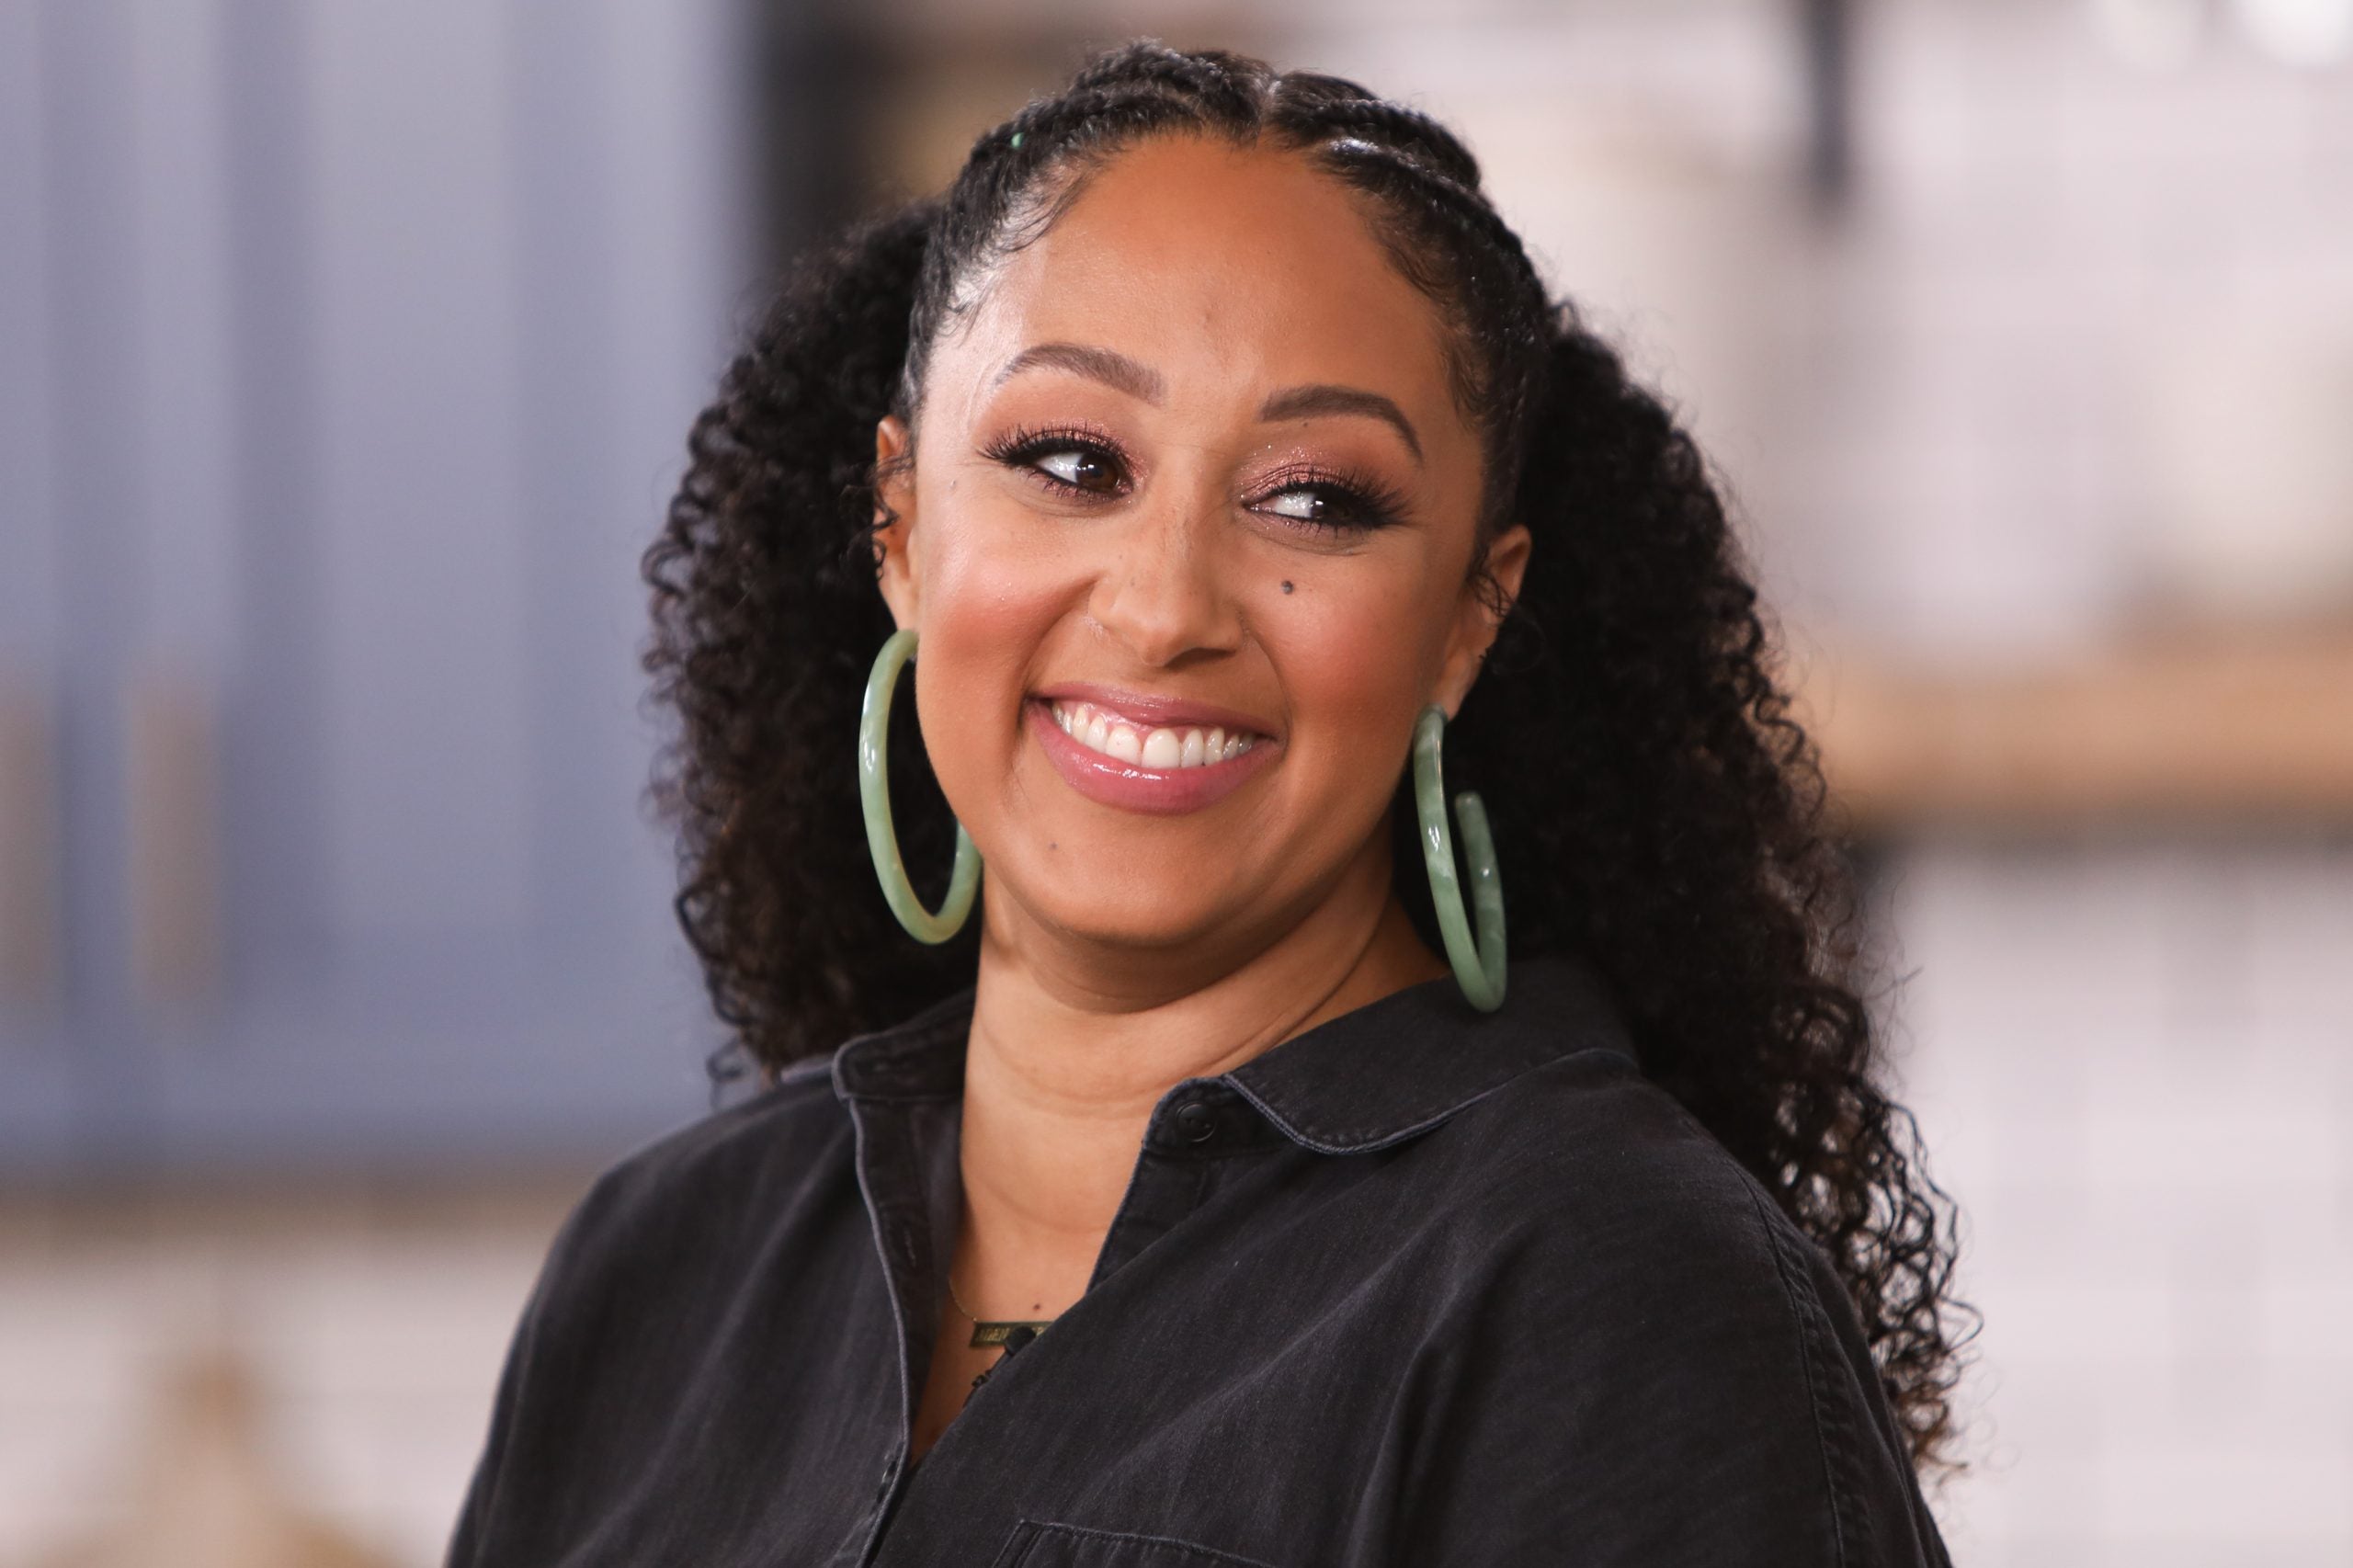 Tamera Mowry-Housley Gets Real About ‘The Real’ In New Book, “You Should Sit Down For This”